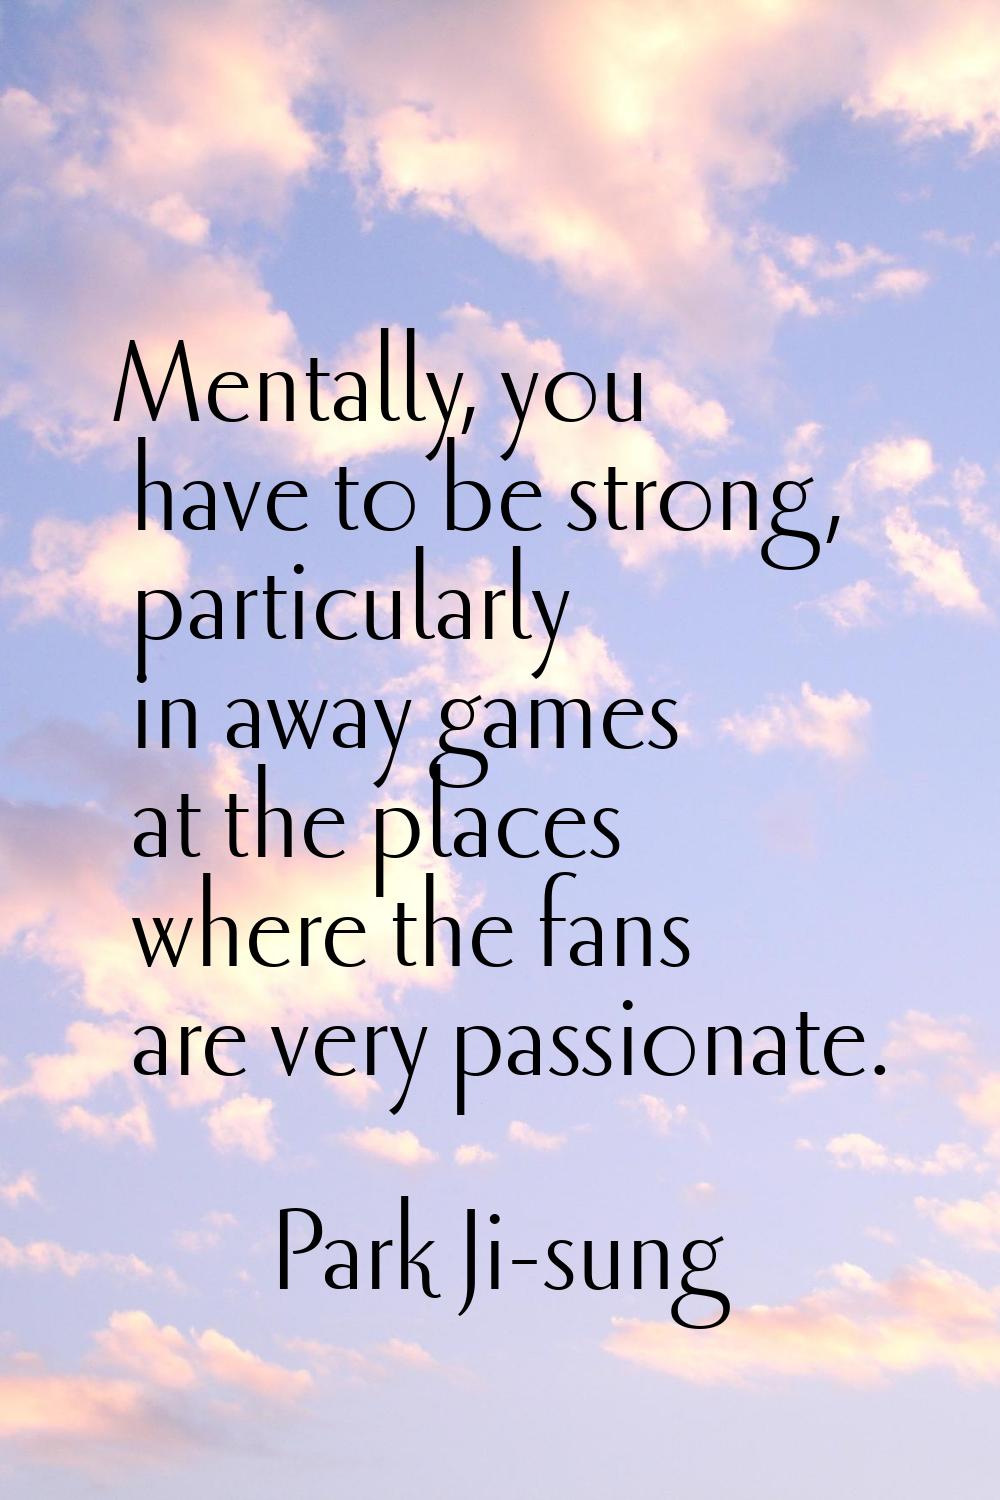 Mentally, you have to be strong, particularly in away games at the places where the fans are very p